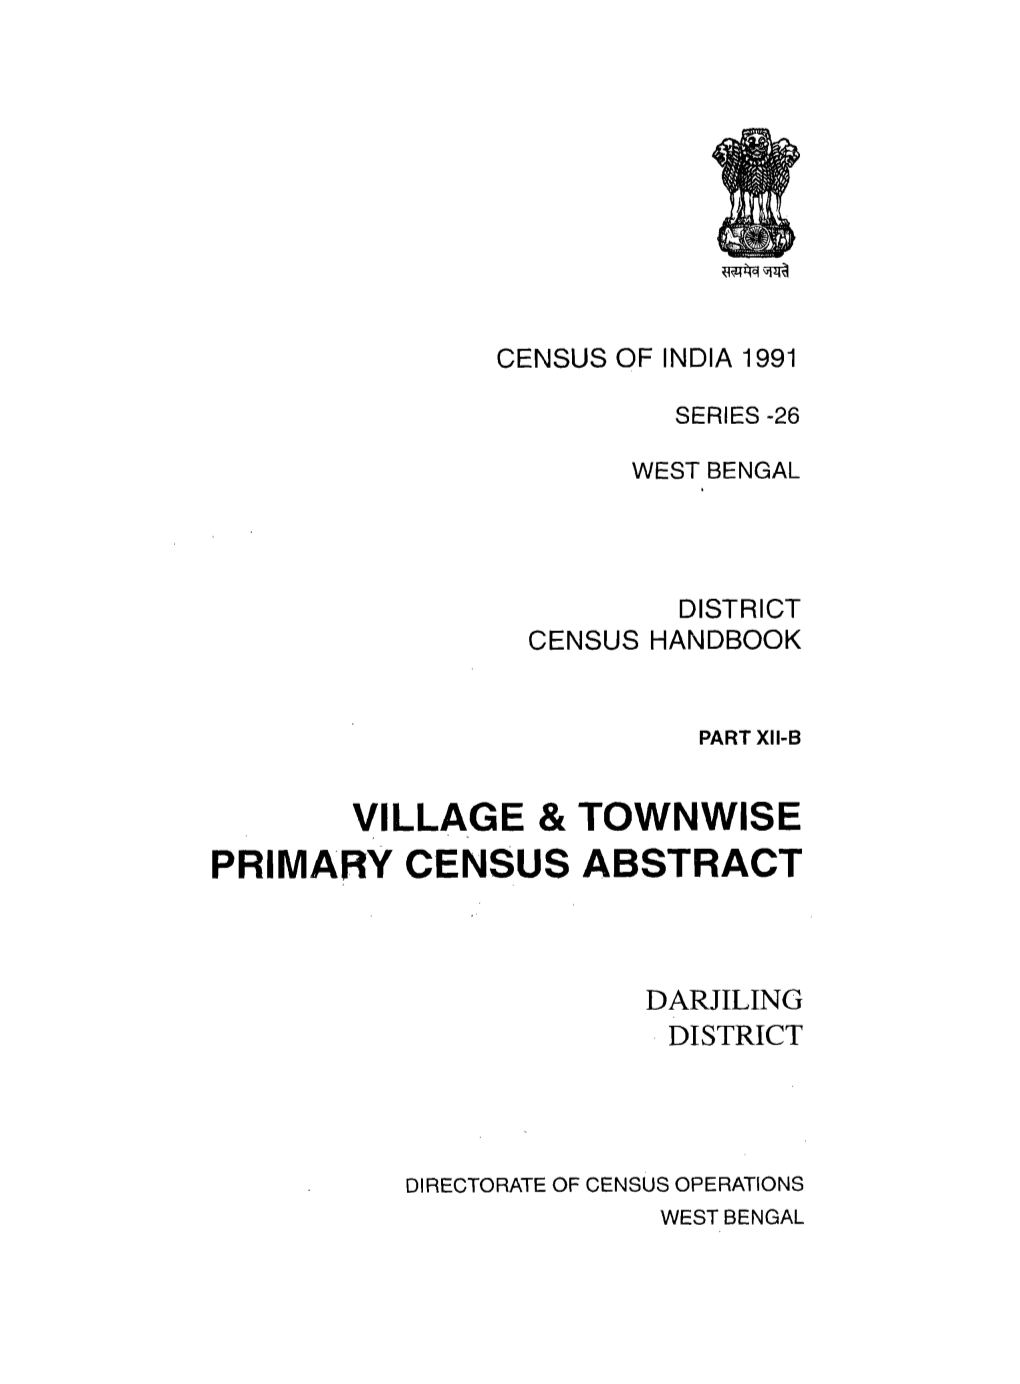 Village & Townwise Primary Census Abstract, Darjiling, Part XII-B